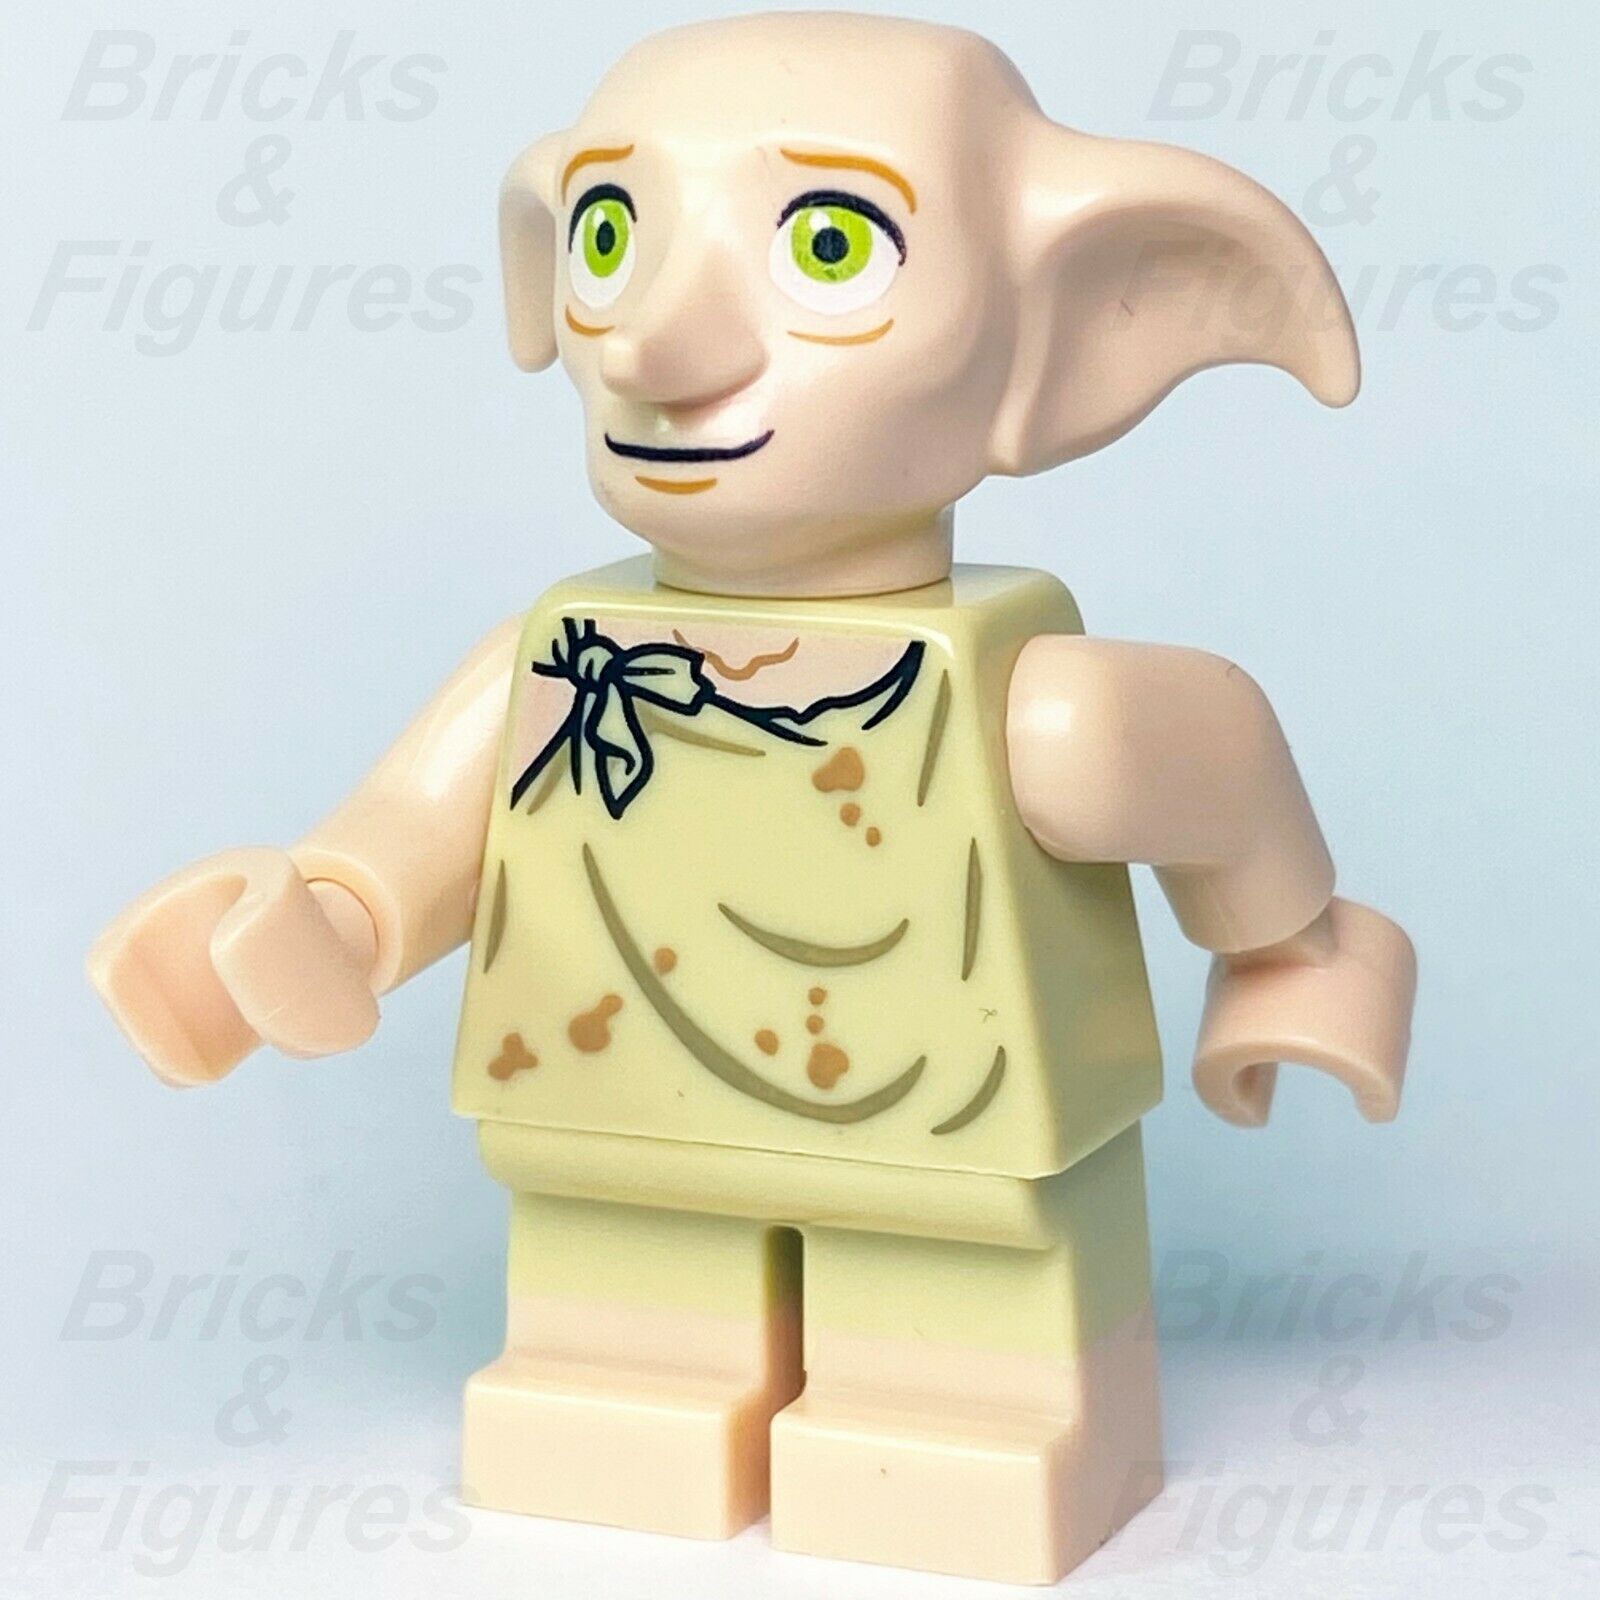 LEGO Harry Potter Dobby the House Elf Collectible Minifigures 71022